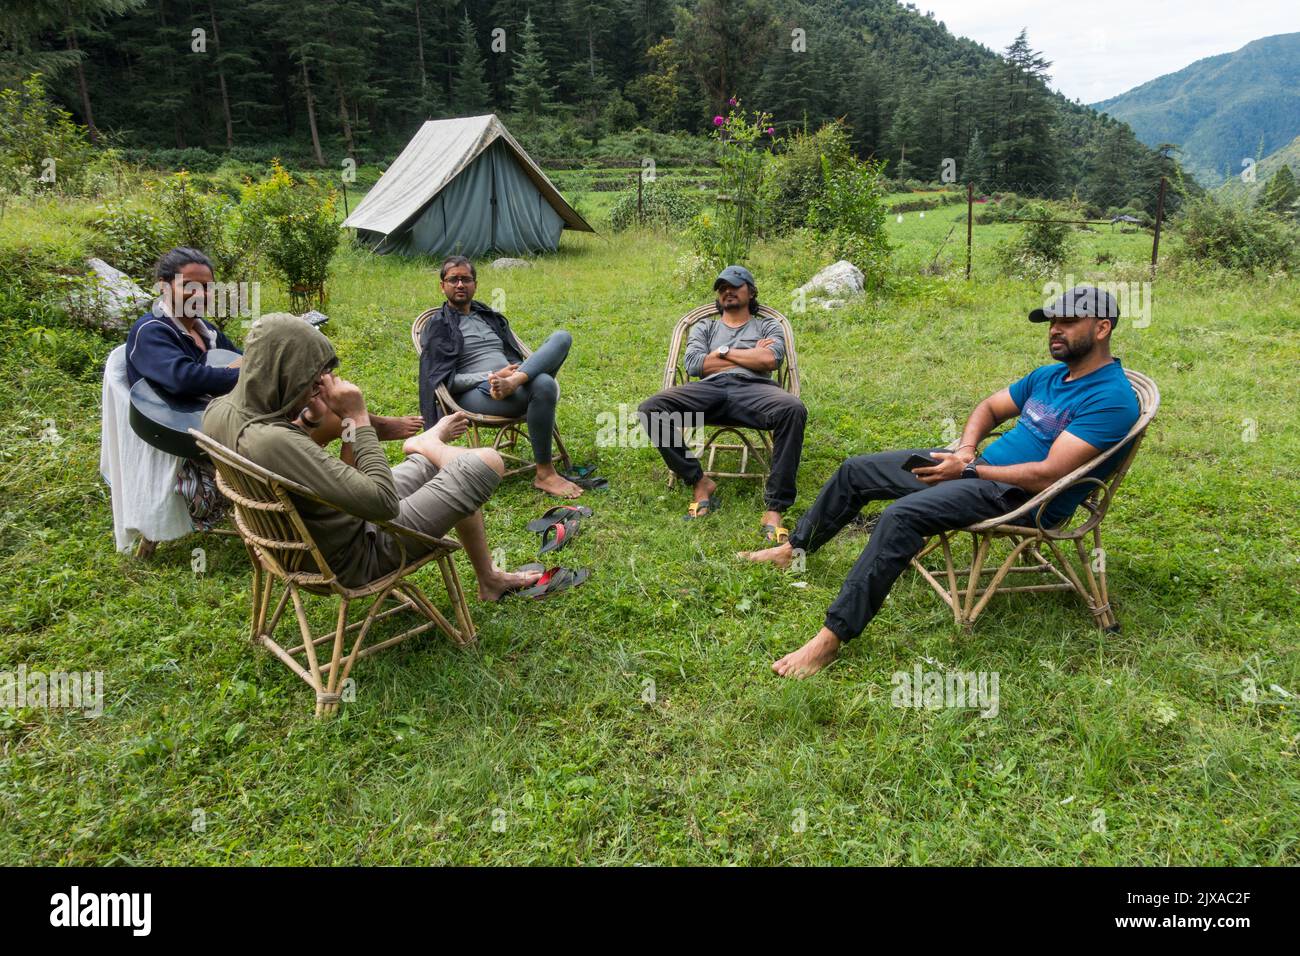 September 17th 2021 Himalayas Uttarakhand India. A group of campers relaxing together on a campsite surrounded with mountains and deodar forest. Stock Photo